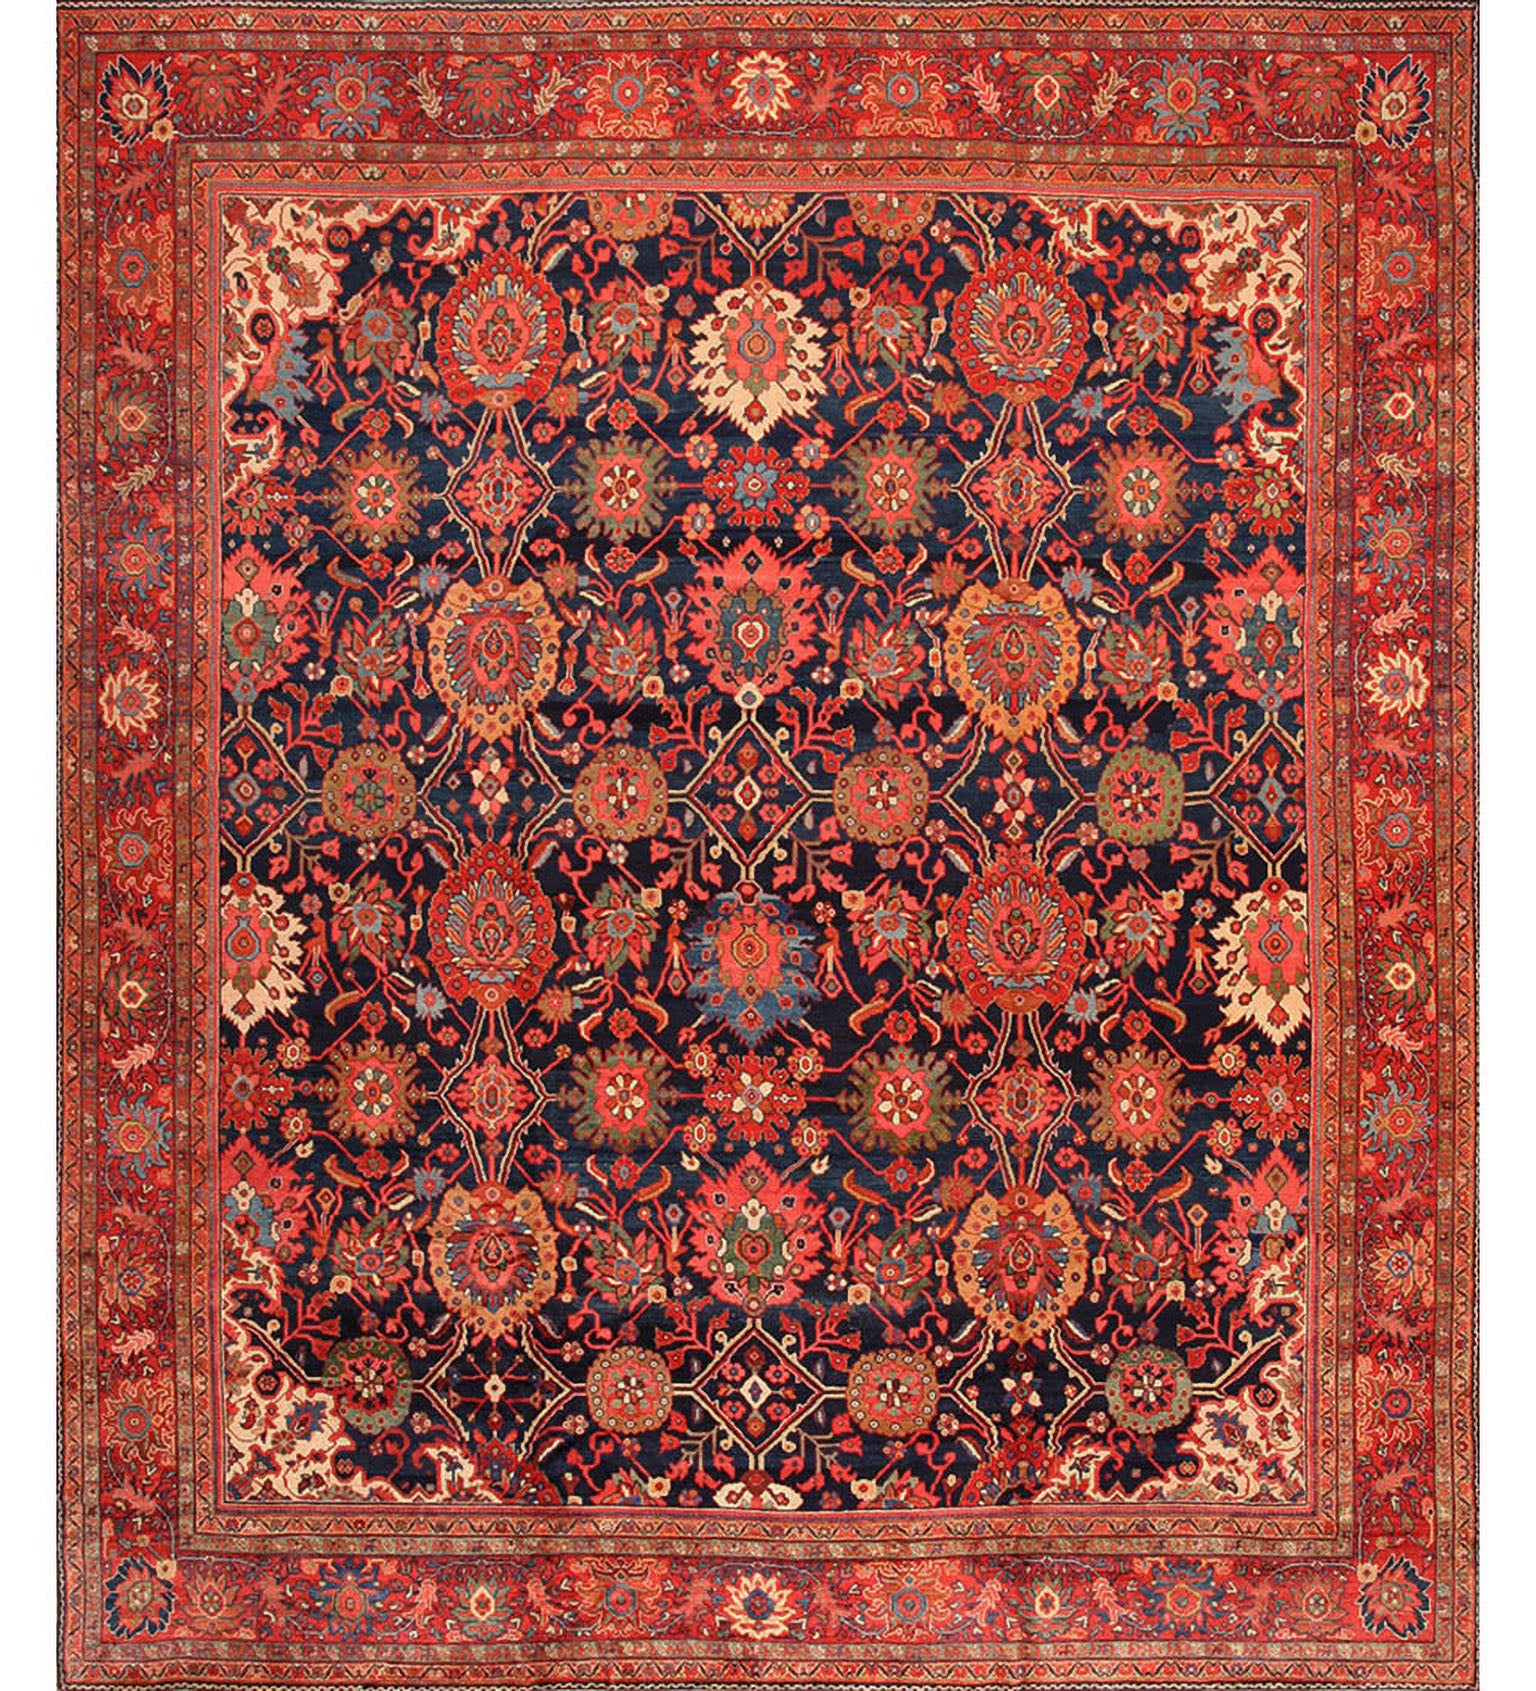 Antique Sultanabad Persian Rug